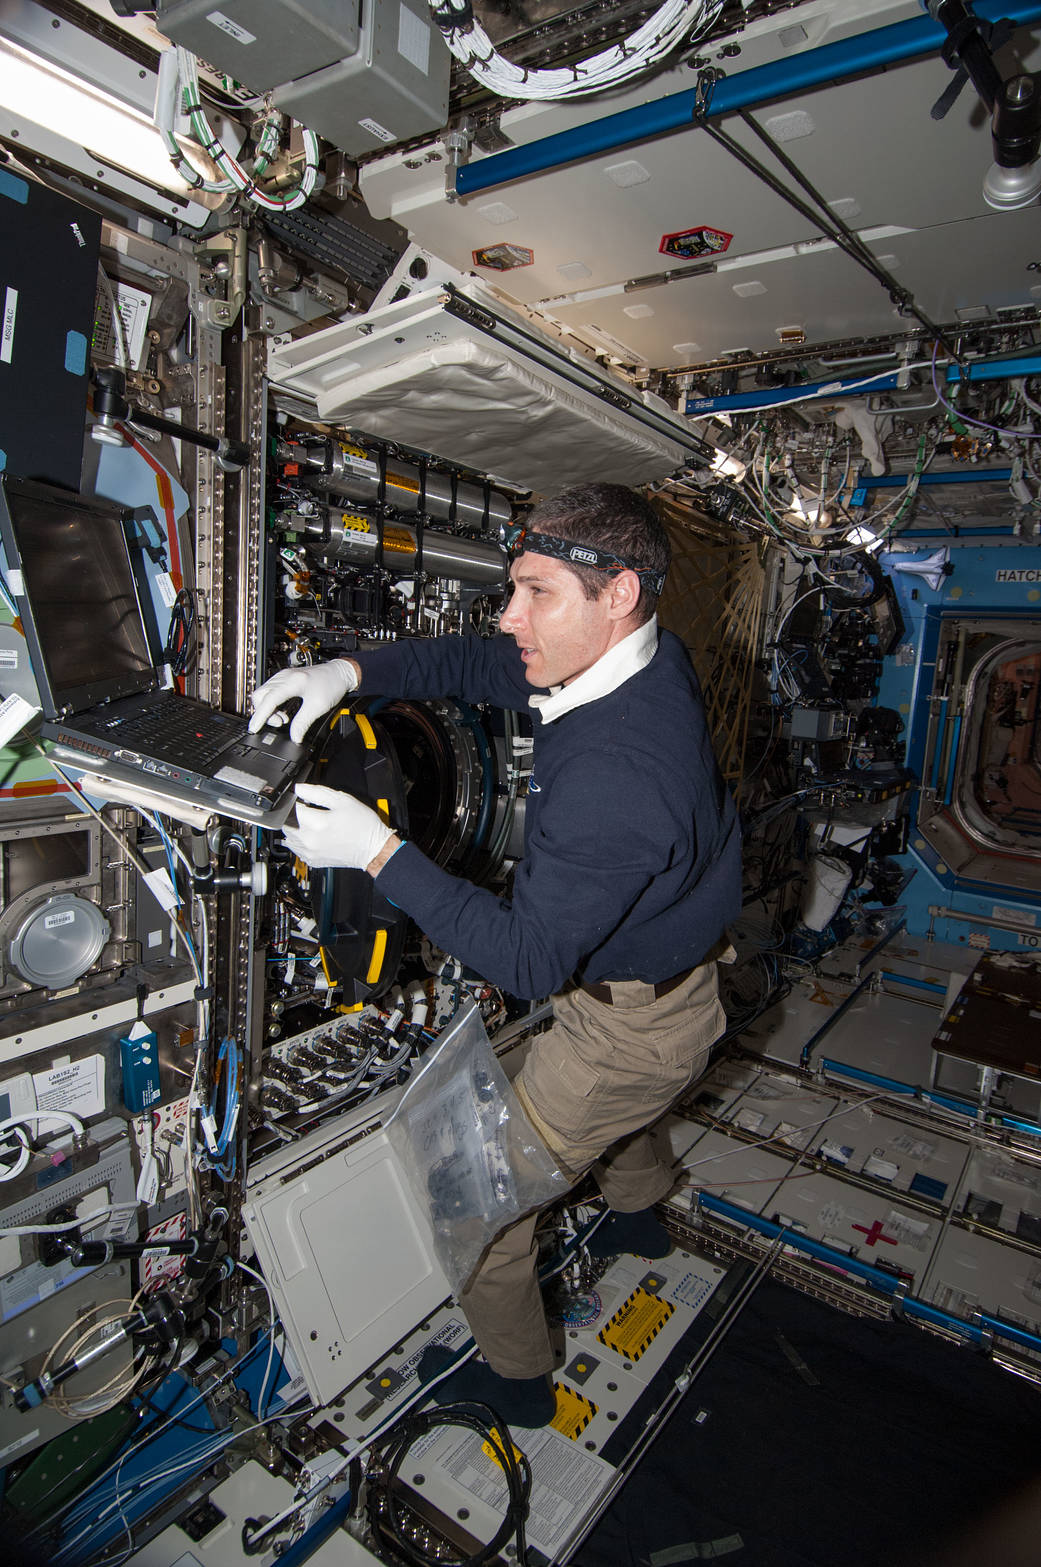 NASA astronaut Mike Hopkins, Expedition 38 flight engineer, performs in-flight maintenance on combustion research hardware in th